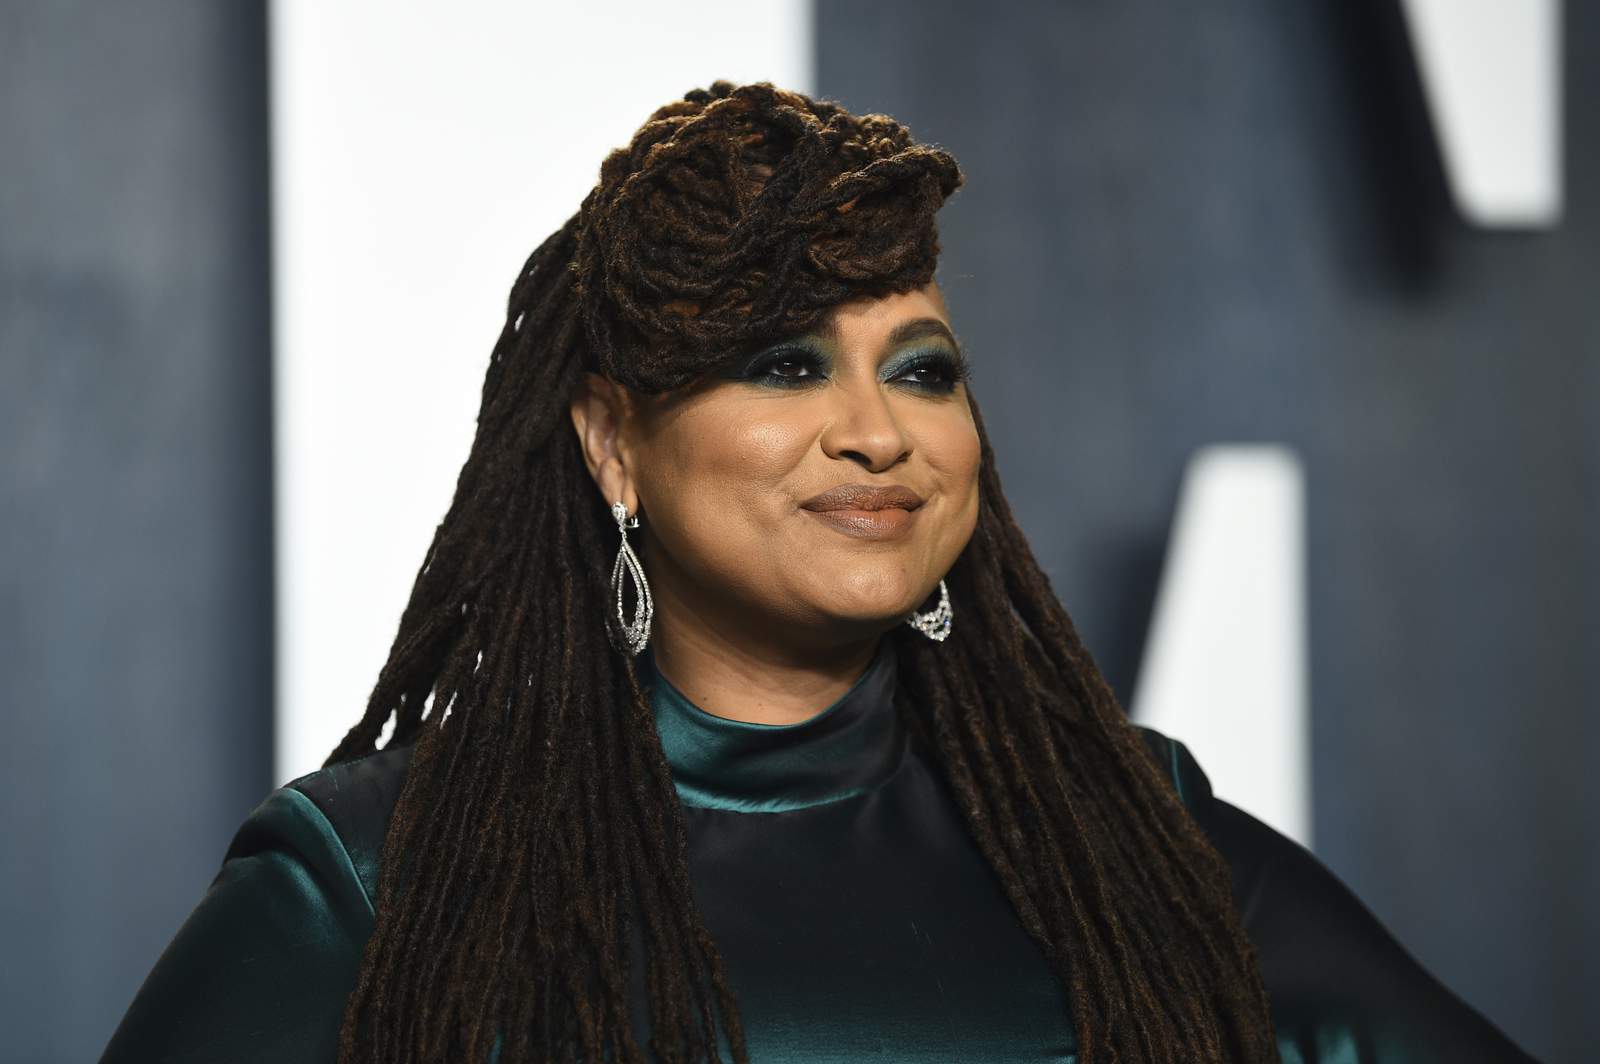 Filmmaker Ava DuVernay, her company honored by MacDowell